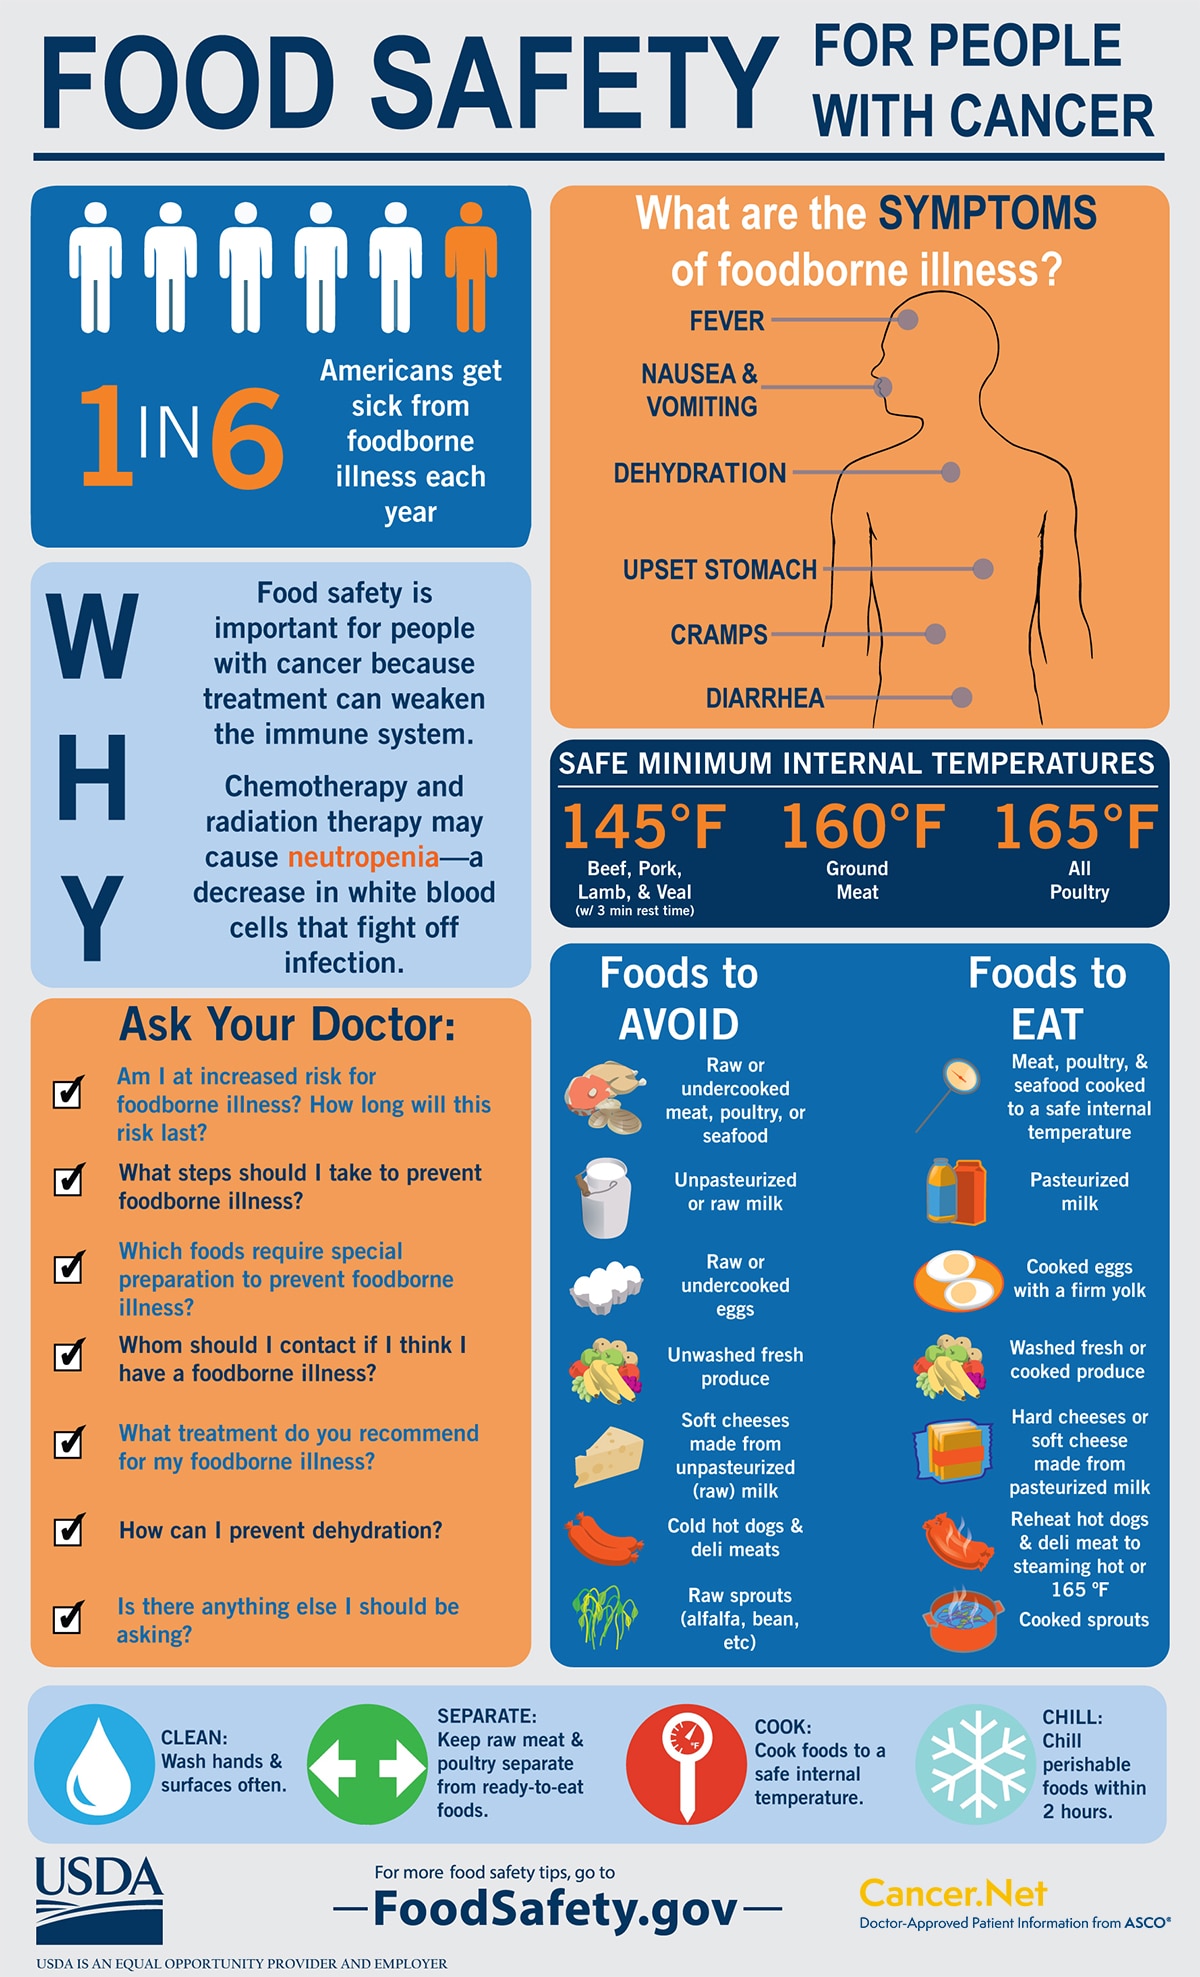 Infographic from FoodSafety.gov with food safety tips for people with cancer and steps for preventing foodborne illness.